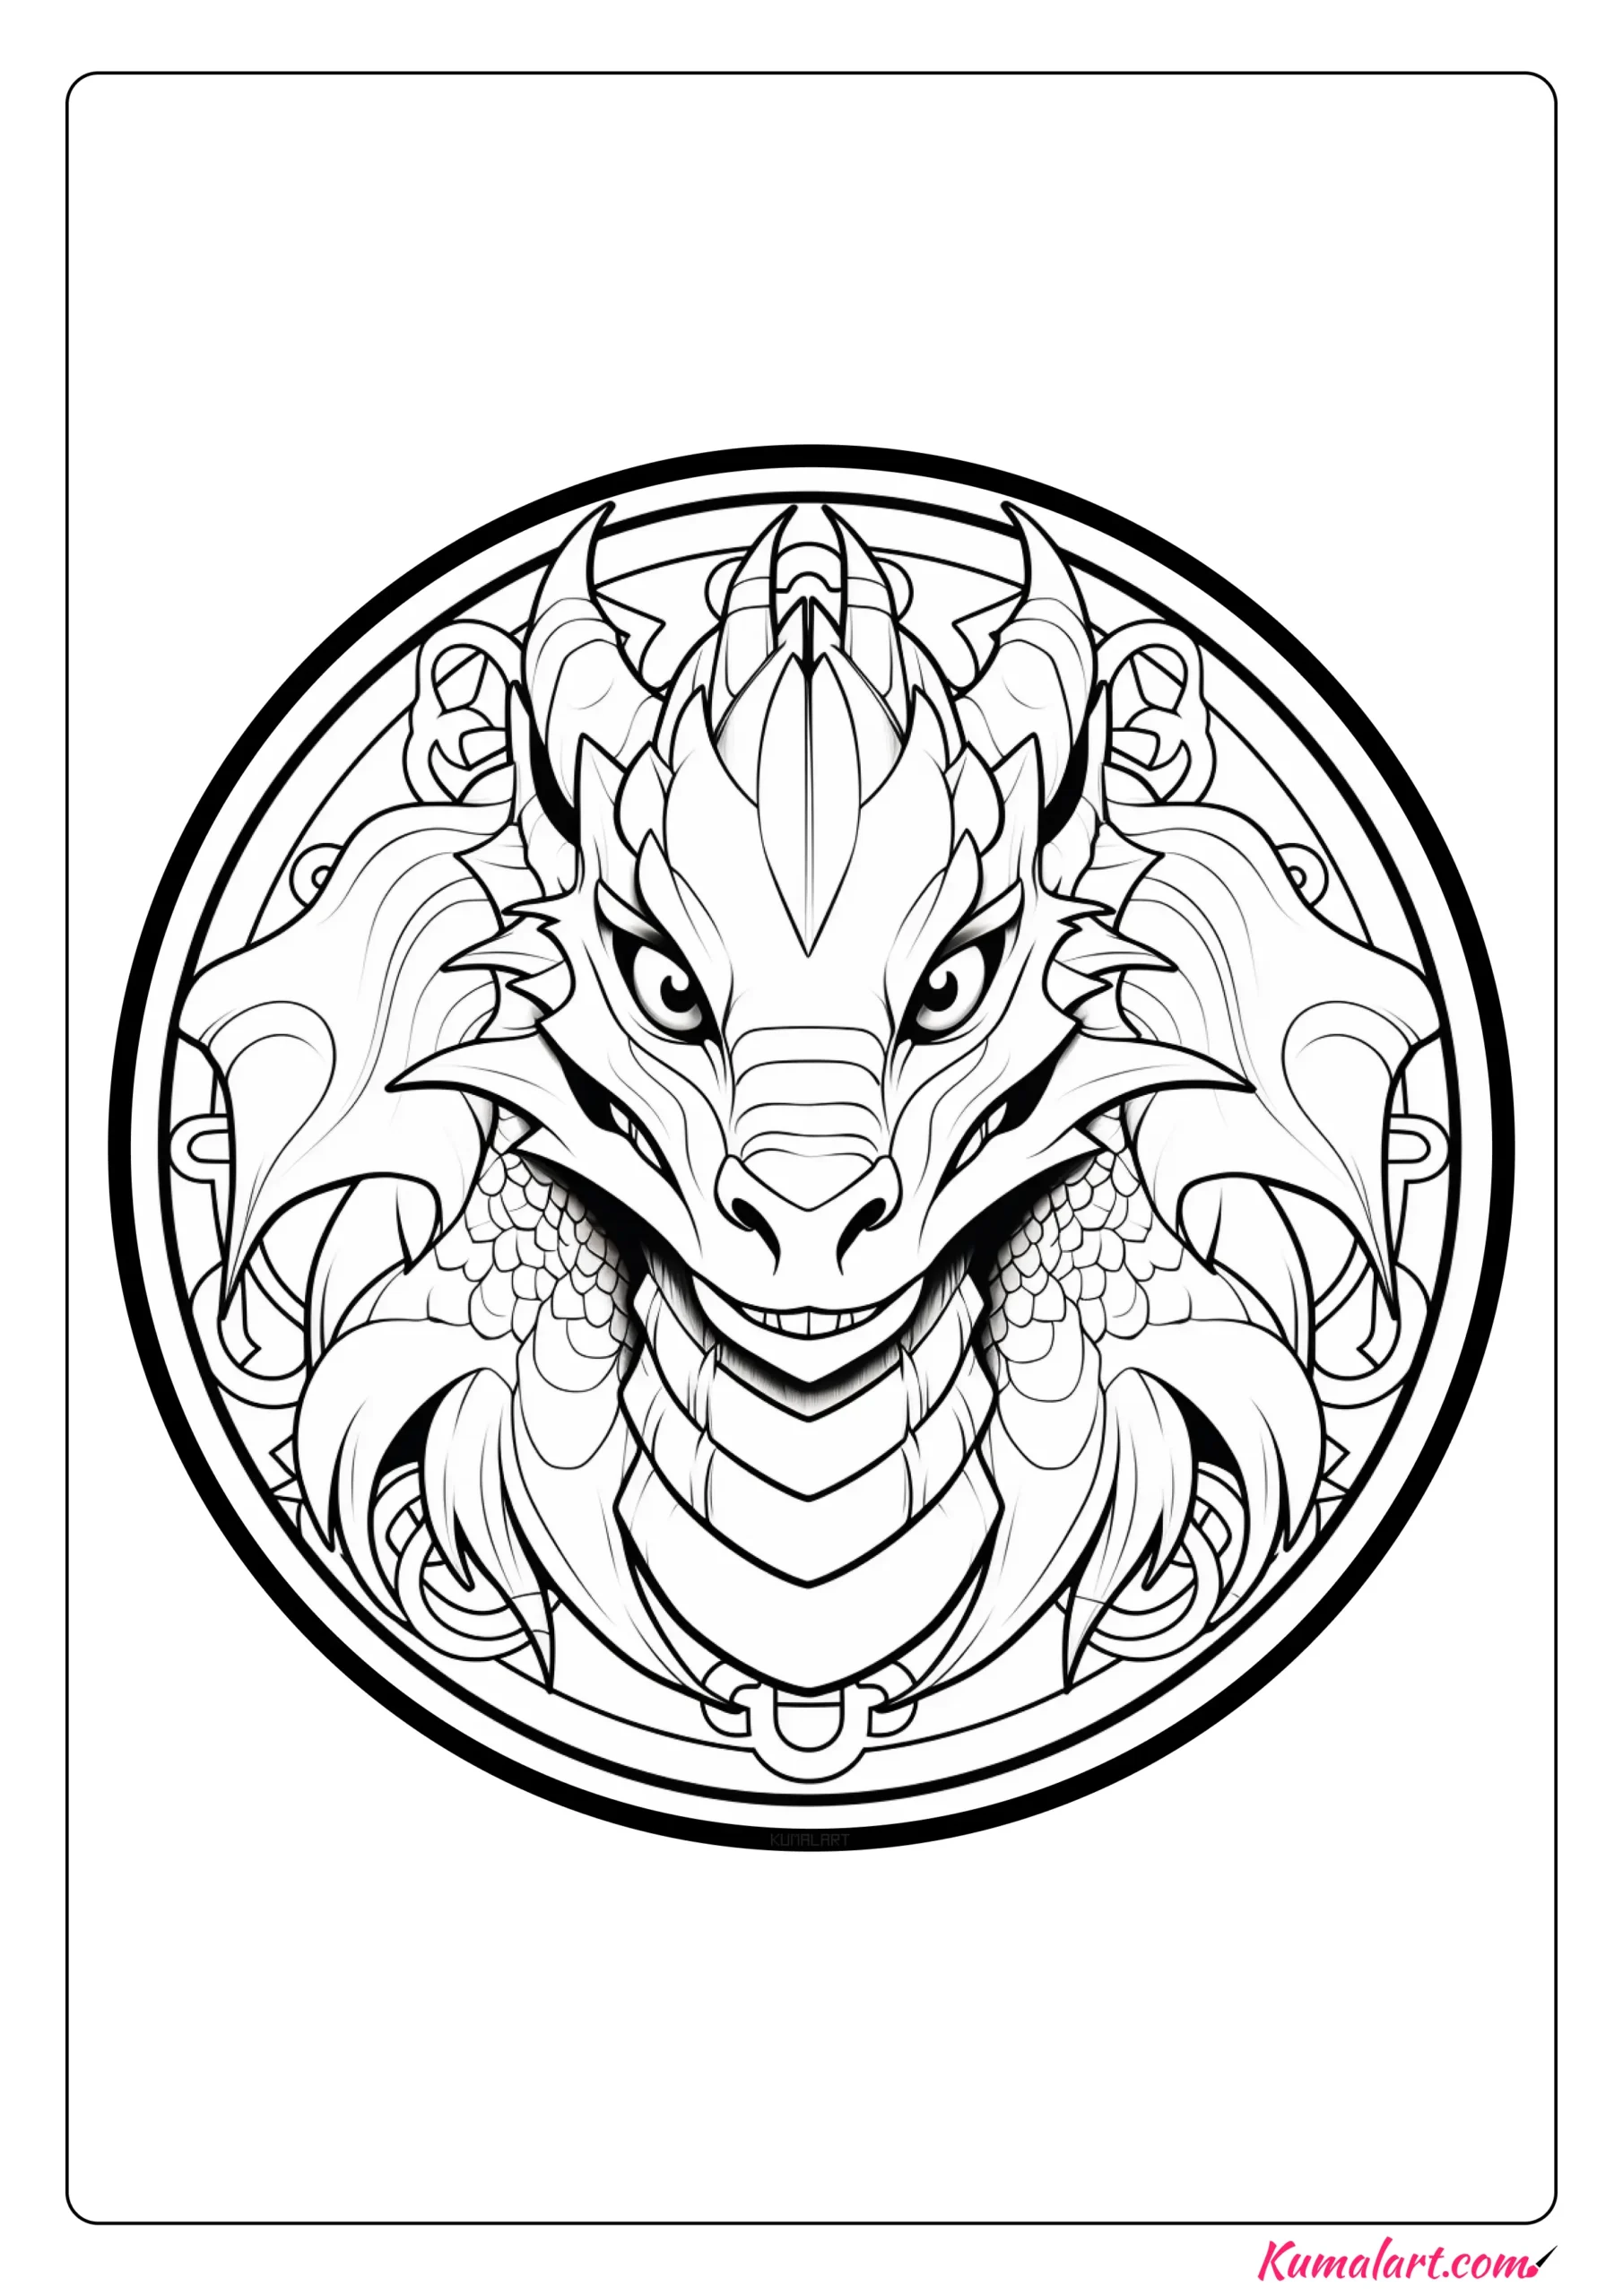 Jola the Dragon Coloring Page